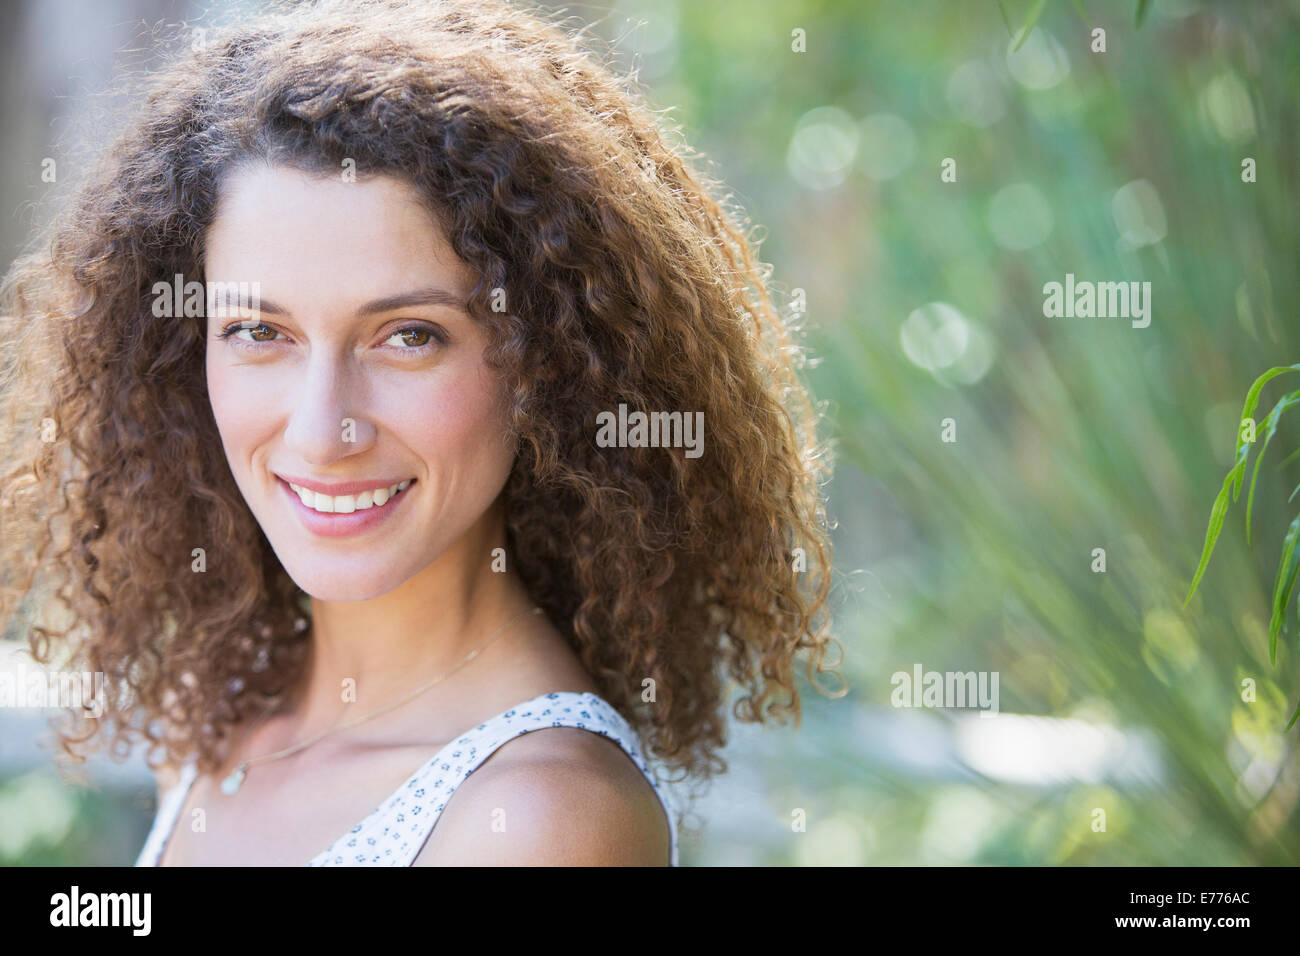 Woman smiling outdoors Stock Photo